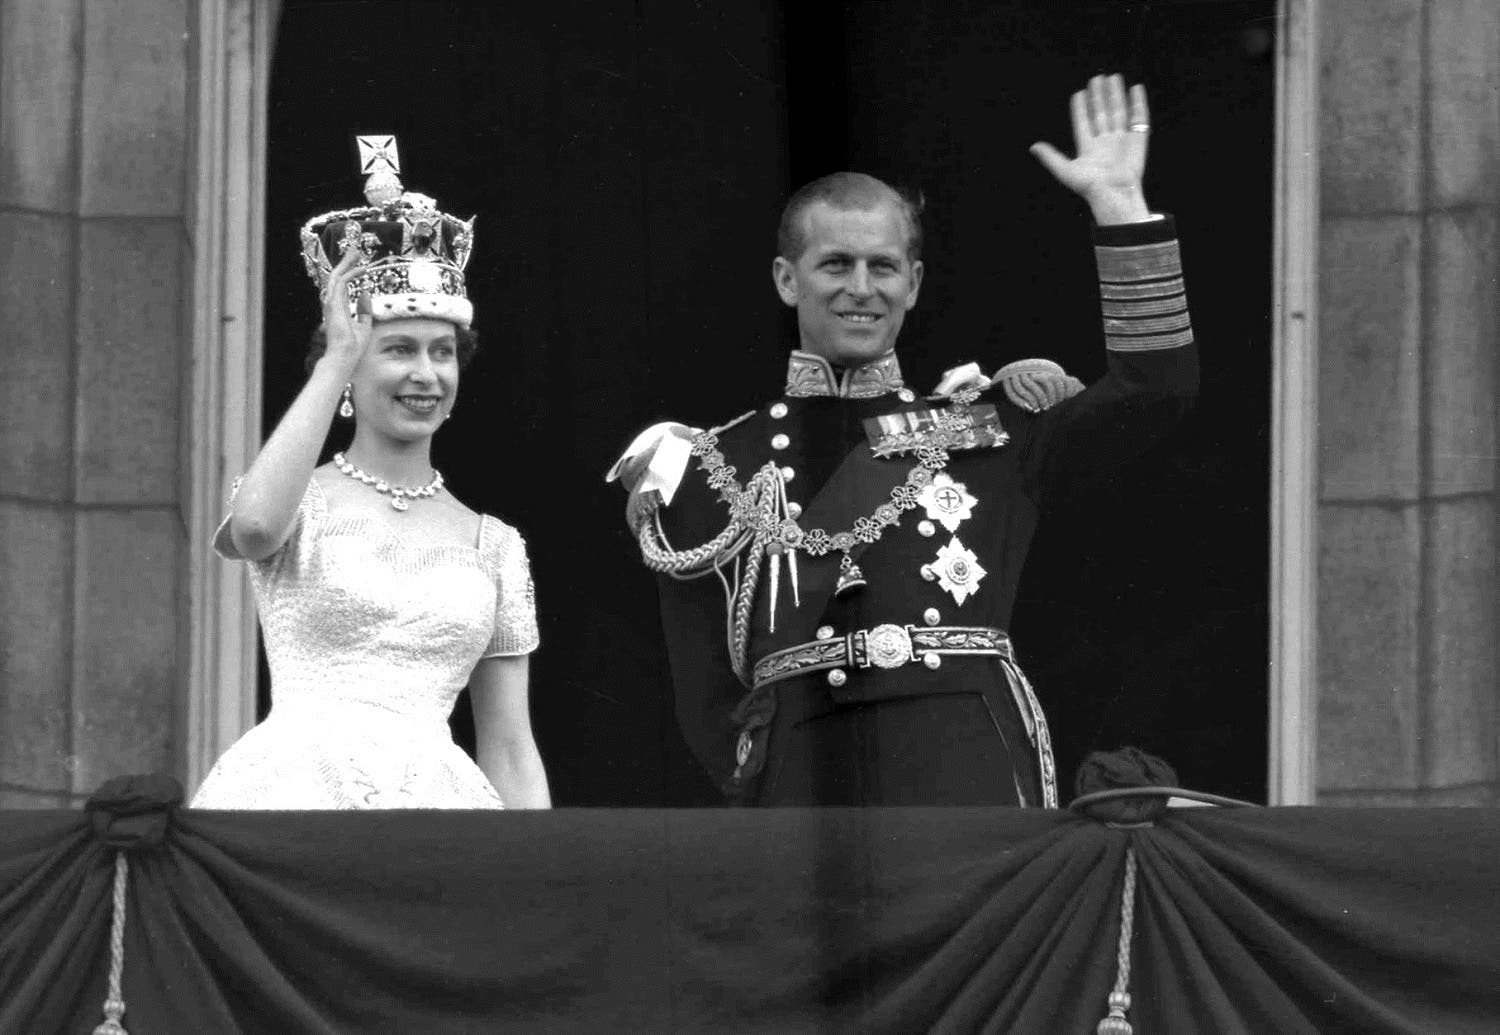 This is a June. 2, 1953 photo of Britain's Queen Elizabeth II and Prince Philip, Duke of Edinburgh, as they wave to supporters from the balcony at Buckingham Palace, following her coronation at Westminster Abbey. London – when she took to the throne (Photo: AP /Leslie Priest)